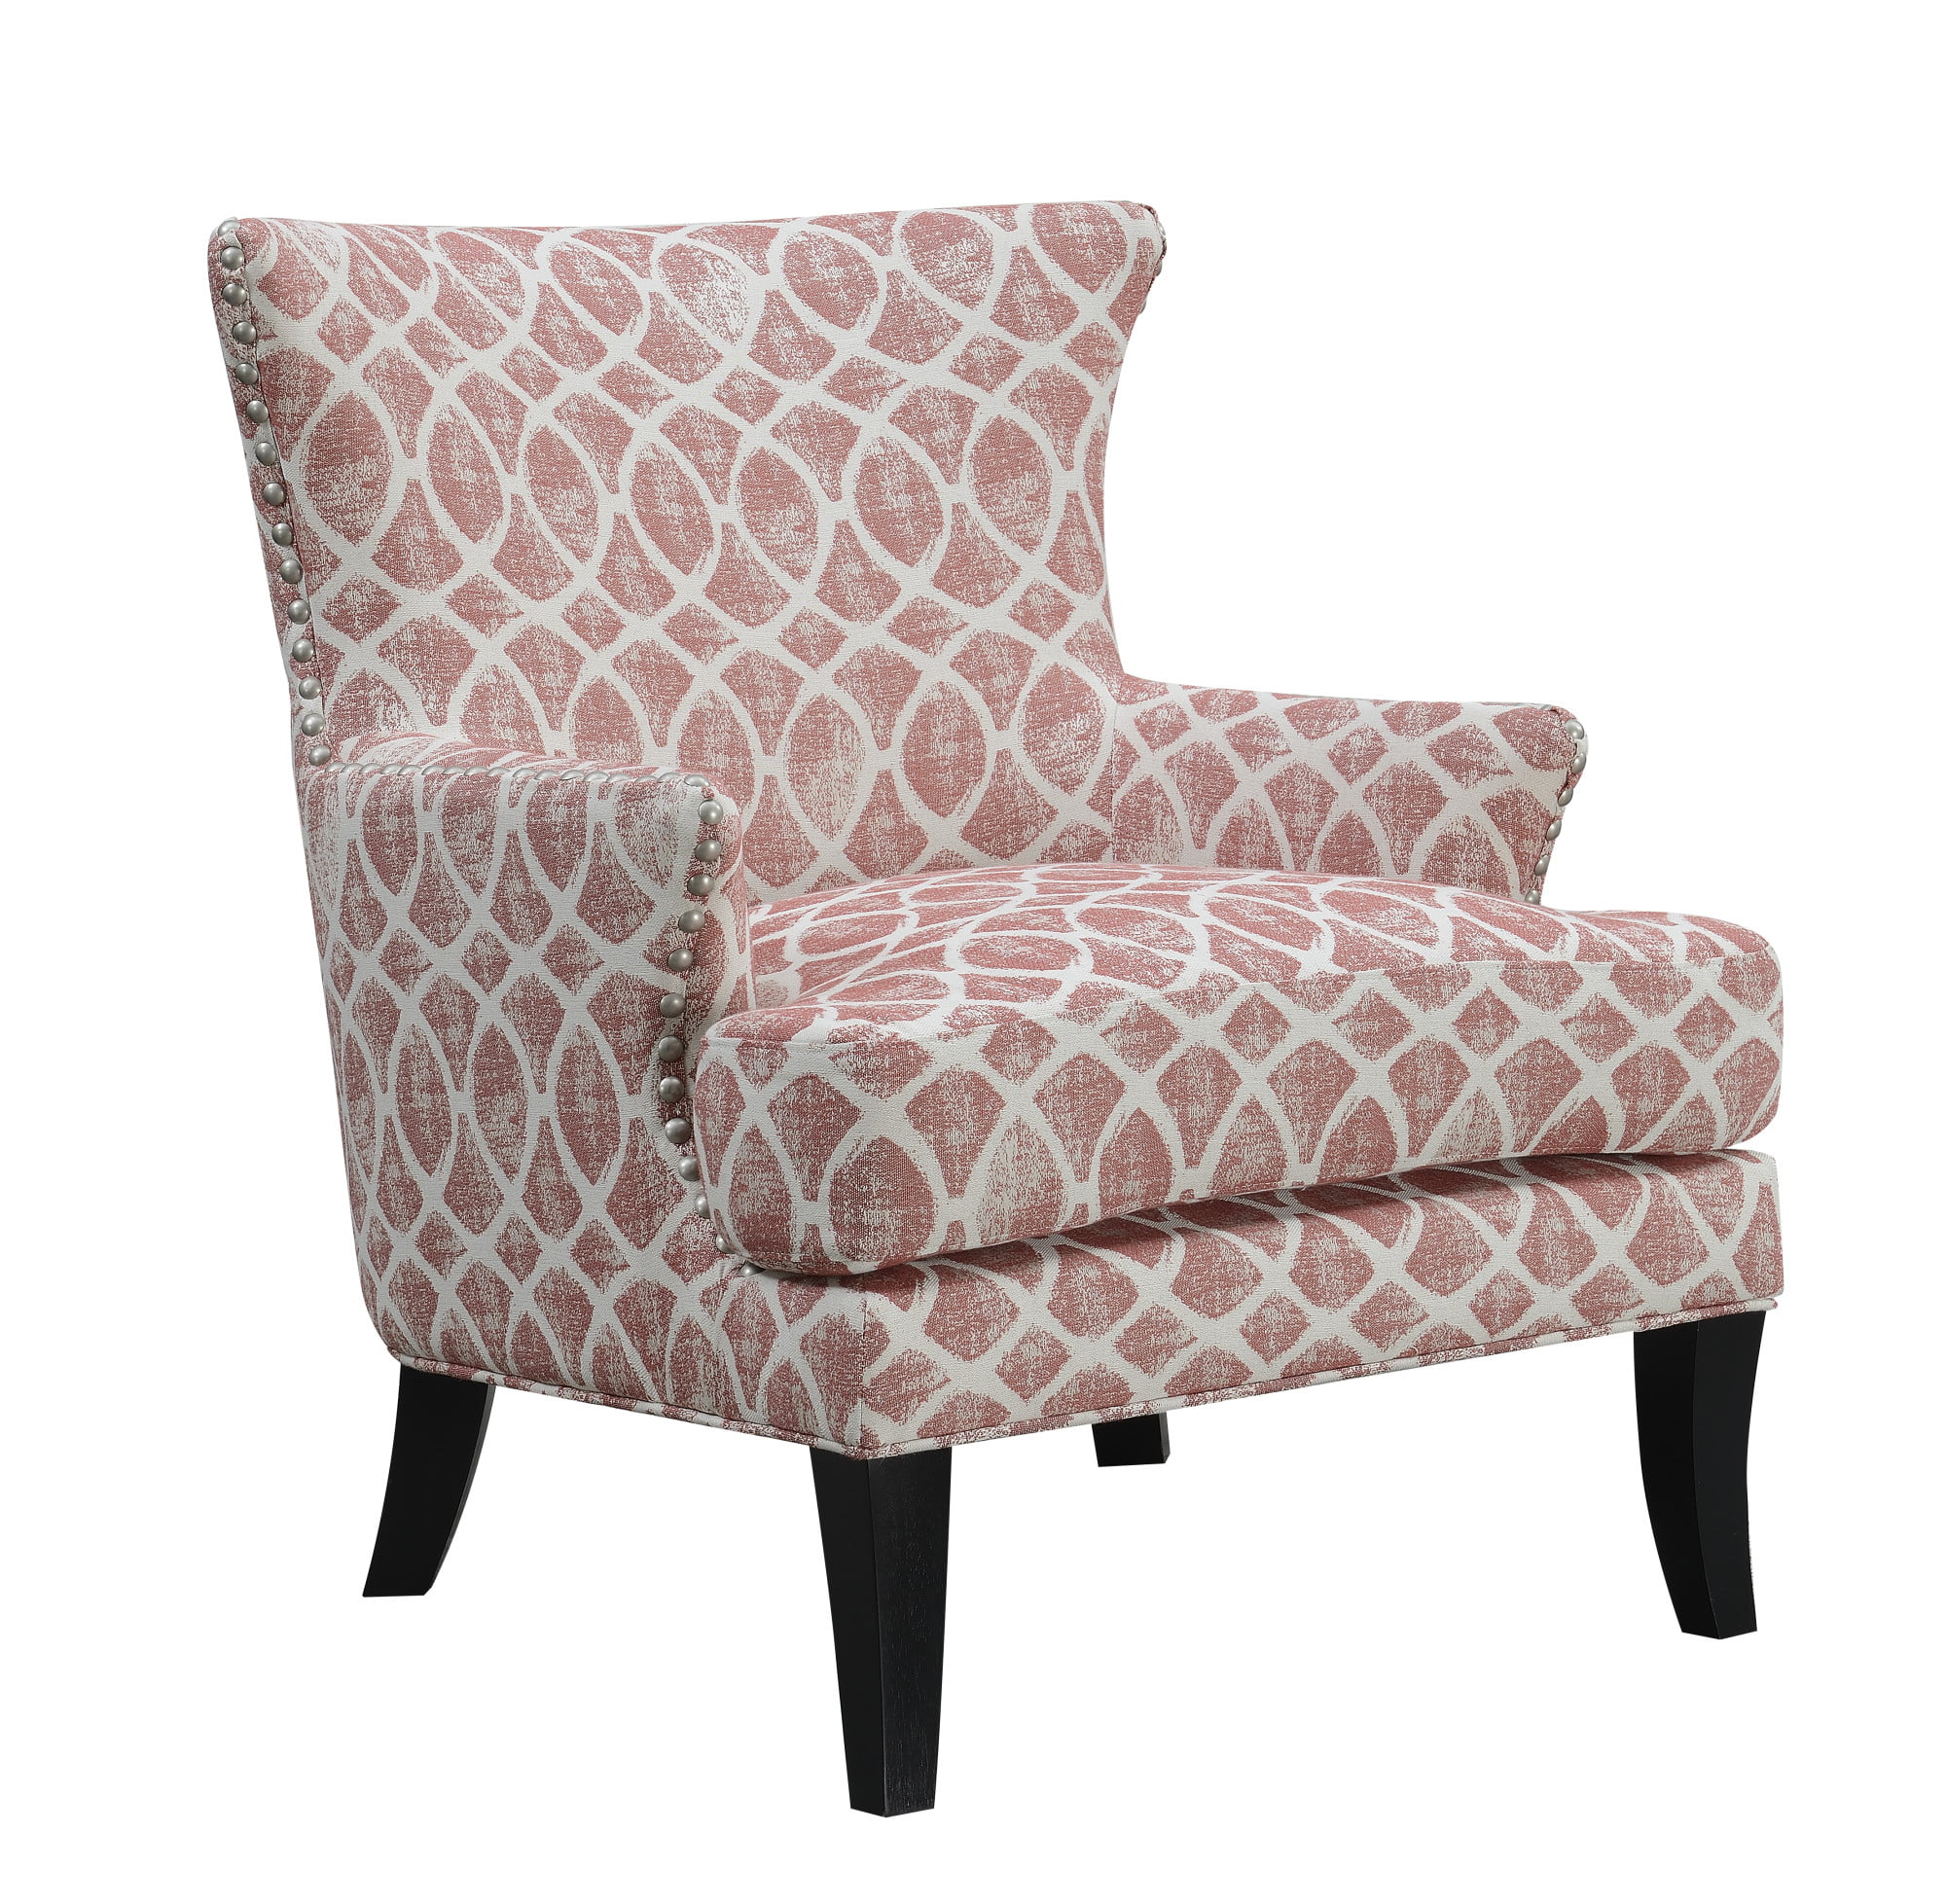 Emerald Home Blythe Dusty Rose and Ivory Accent Chair with